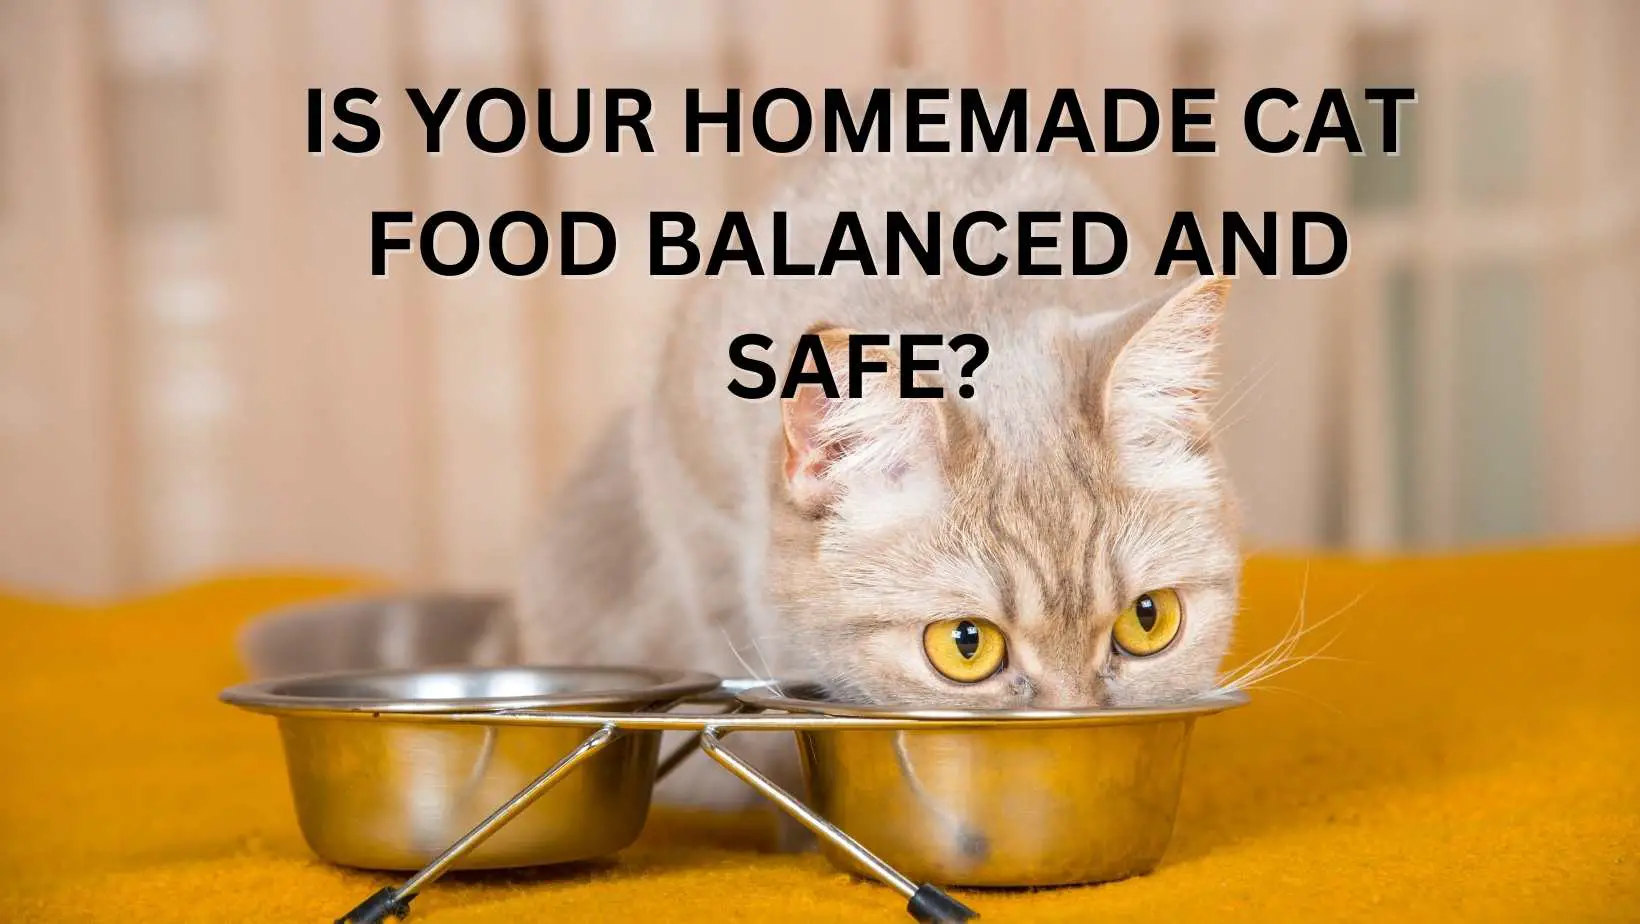 Homemade Cat Food – Is Your Homemade Cat Food Balanced and Safe?